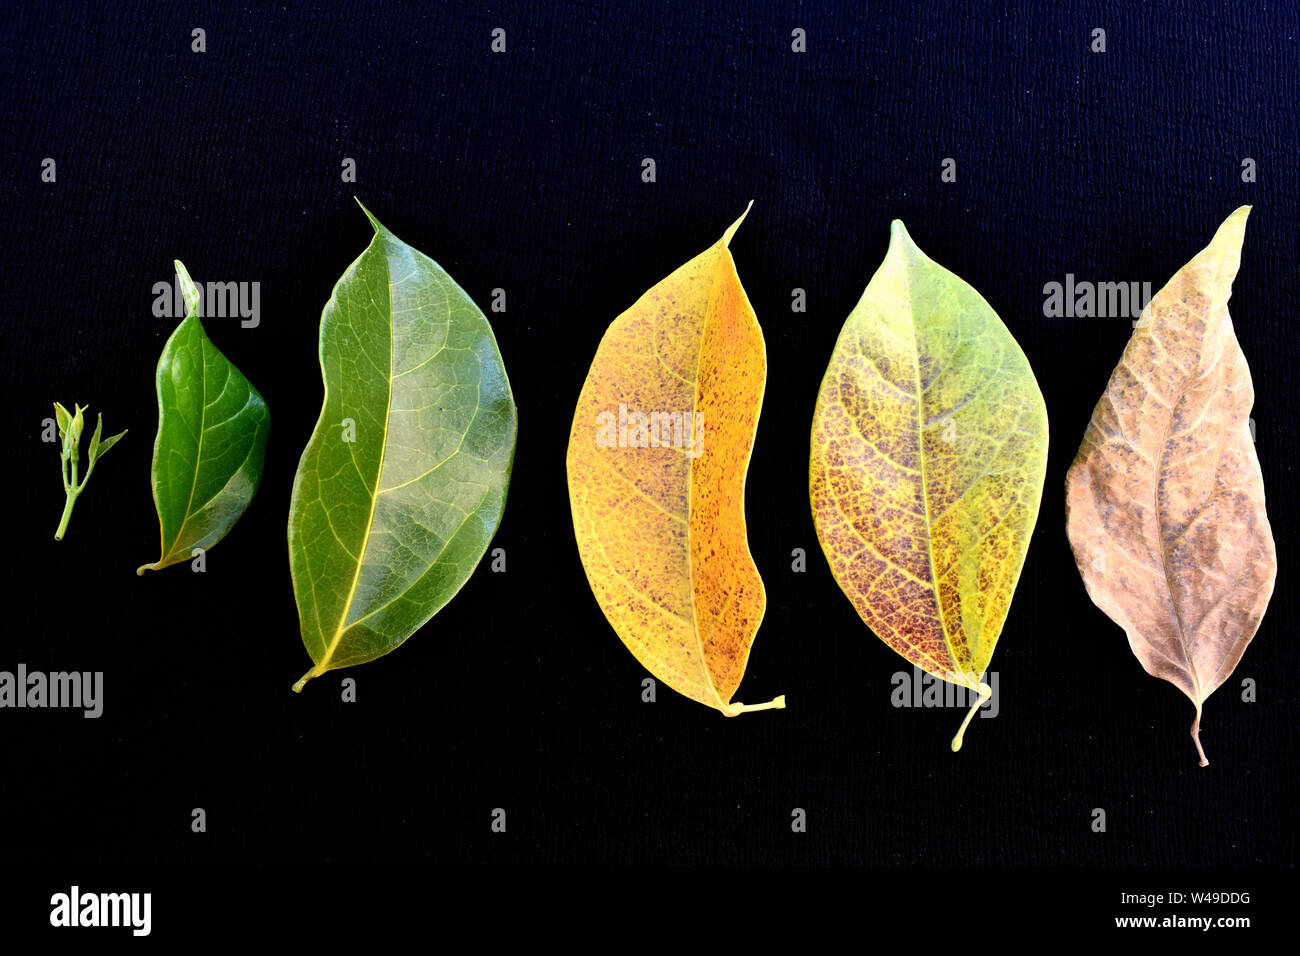 Life cycle of the leaves of Garlic vine isolated on black background. Stock Photo